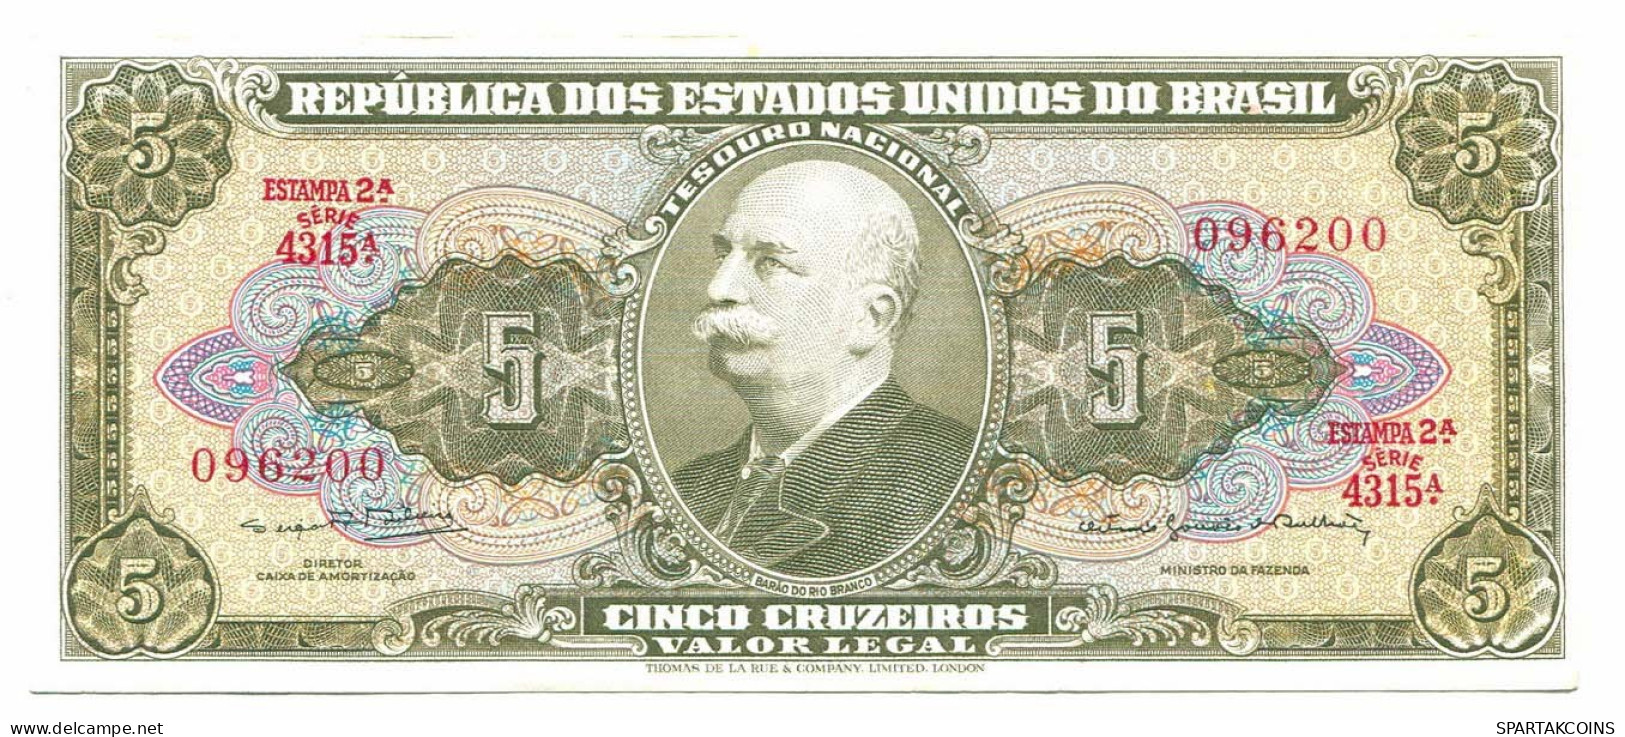 BRASIL 5 CRUZEIROS 1962 UNC Paper Money Banknote #P10830.4 - [11] Local Banknote Issues